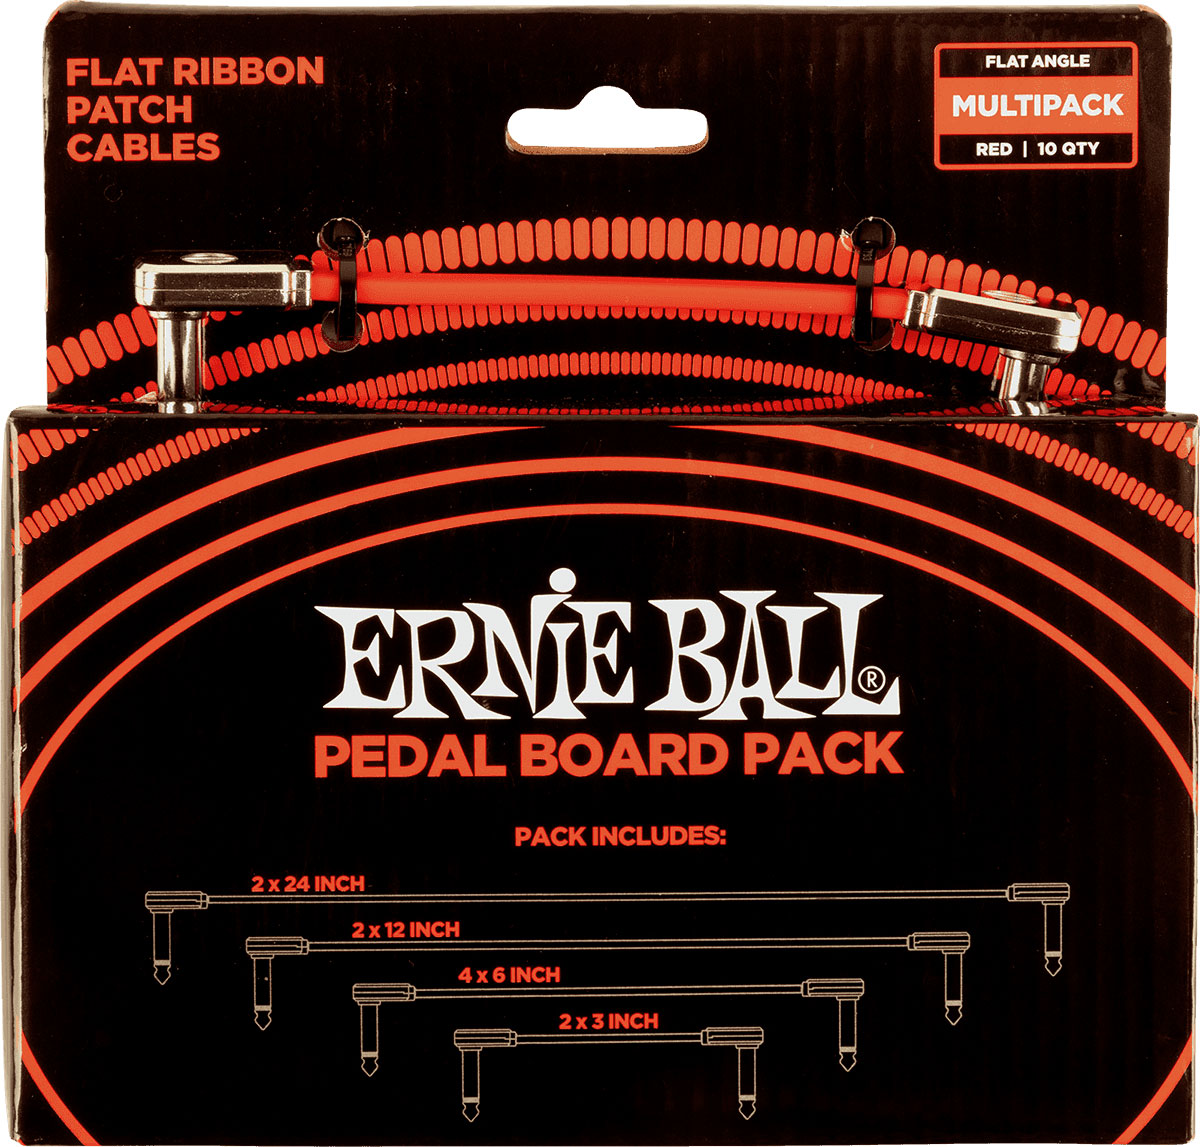 ERNIE BALL PEDALBOARD PACK - 10 PATCHES IN 4 VARIEGATED LENGTHS - THIN & FLAT BEND - RED